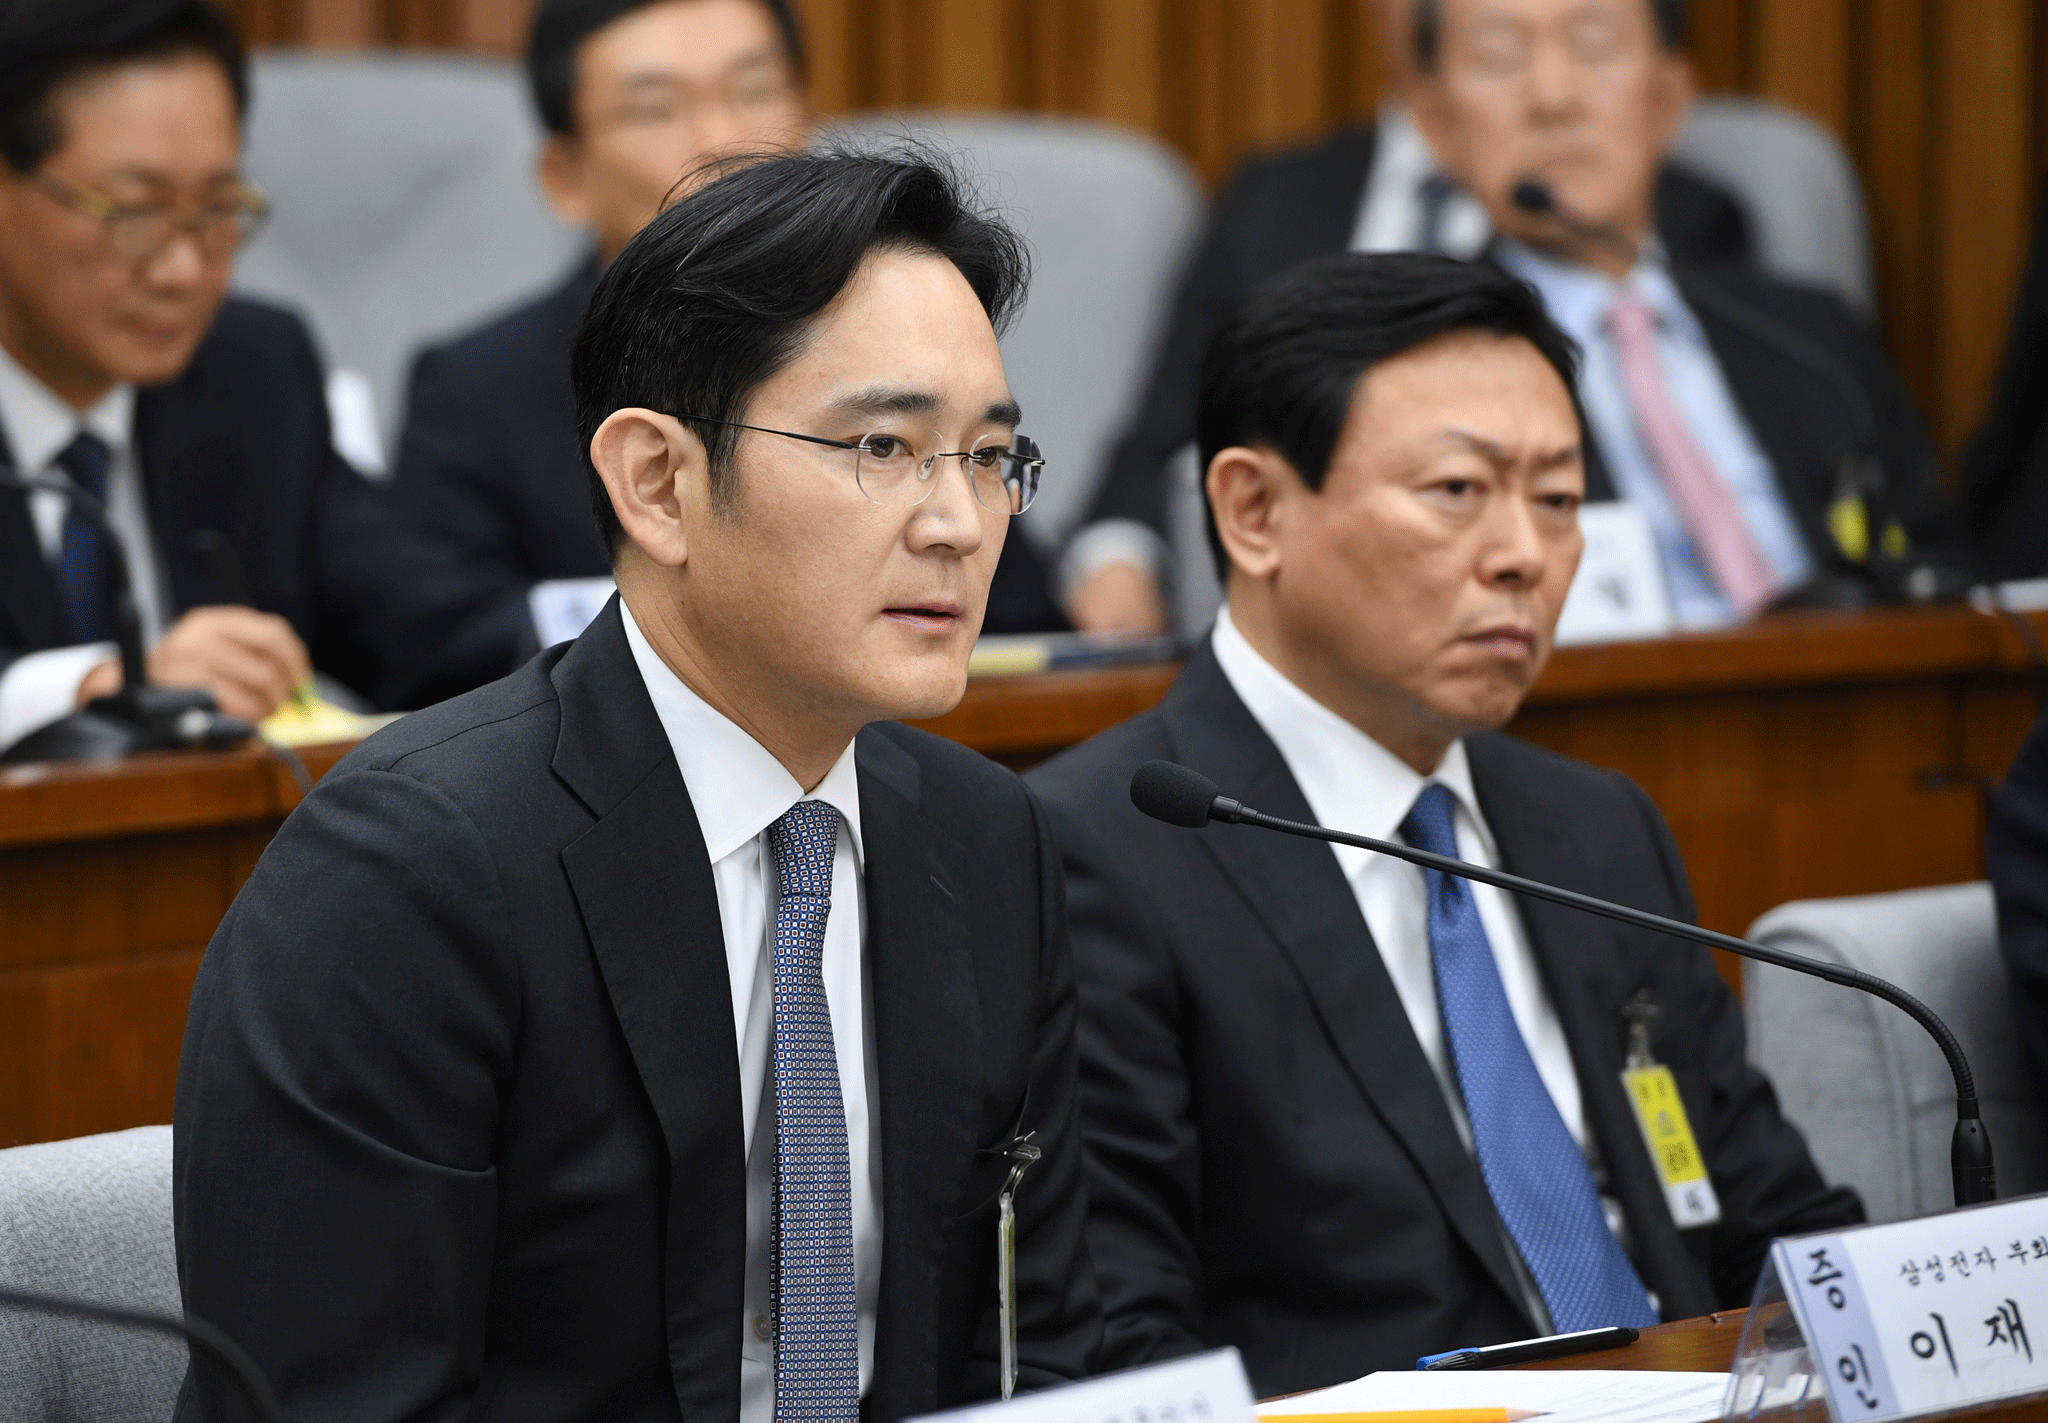 Samsung’s top boss named as suspect in South Korea bribery scandal